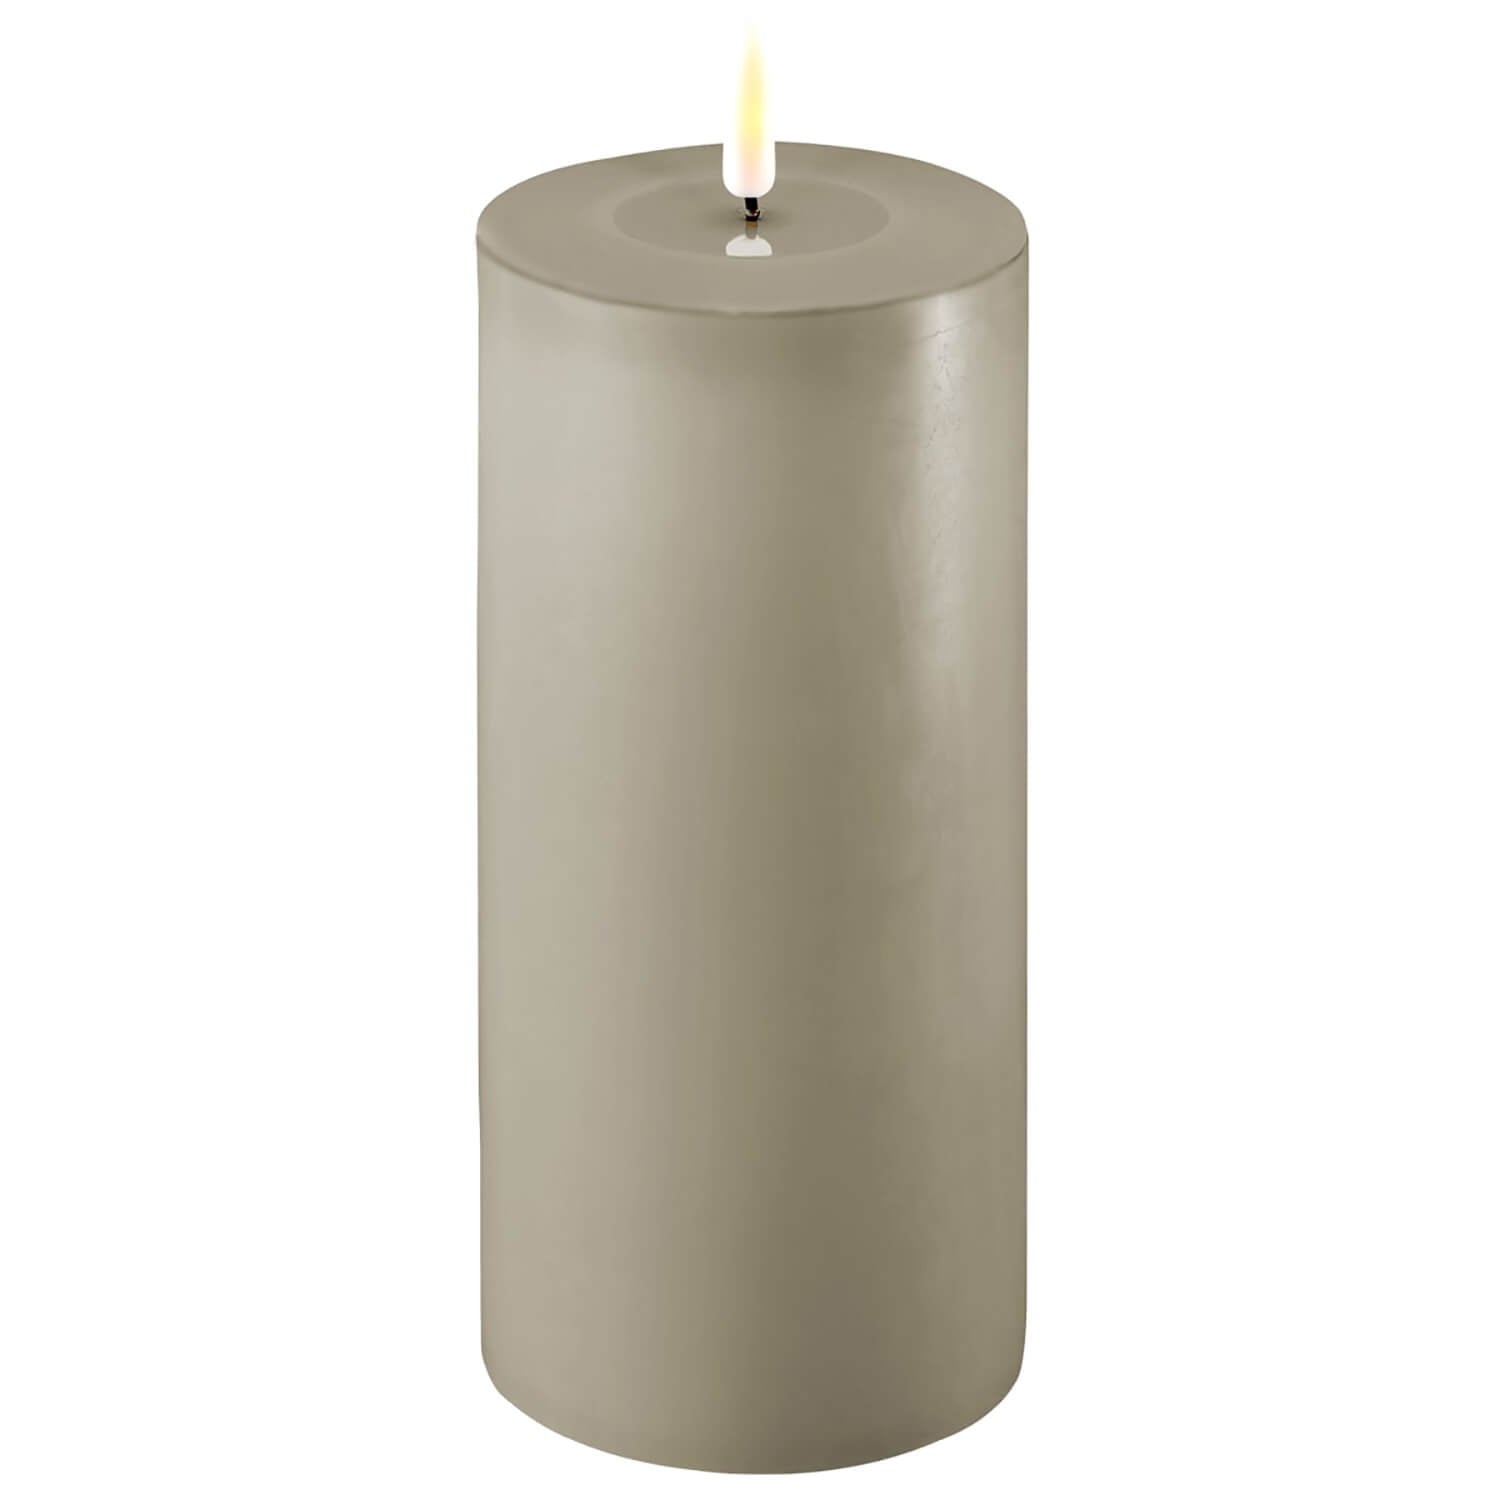 The Home Collection Deluxe LED Candle 10cm x 20cm - Sand 1 Shaws Department Stores